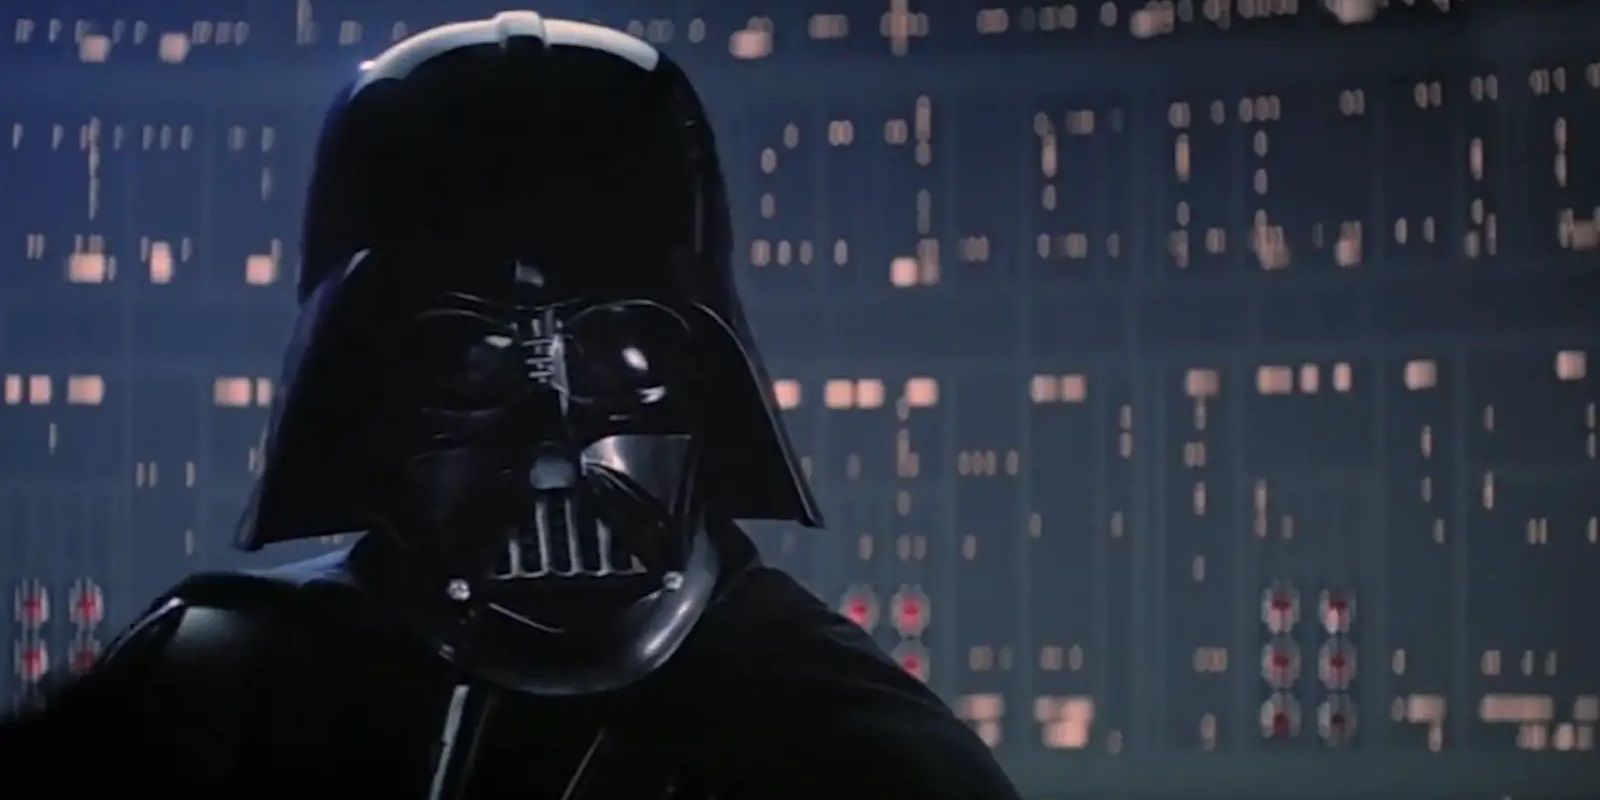 Darth_Vader_on_Bespin_in_The_Empire_Strikes_Back